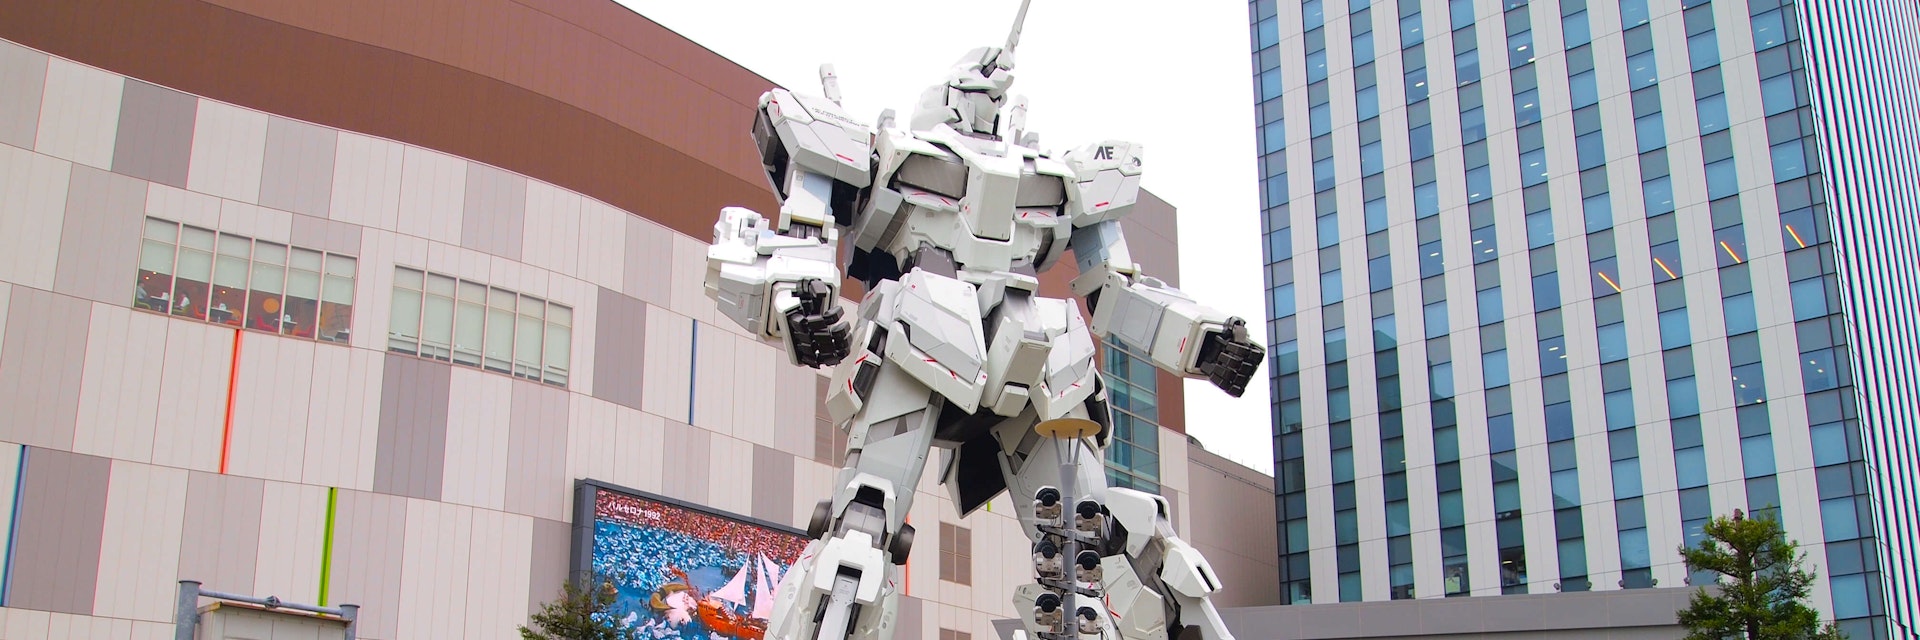 ODAIBA, TOKYO, JAPAN - October 18th, 2019: "The Life-Sized Unicorn Gundam Statue" in Odaiba, Tokyo. Unicorn Gundam is a fictional robot featured in one of the titles of a famous Japanese anime series.